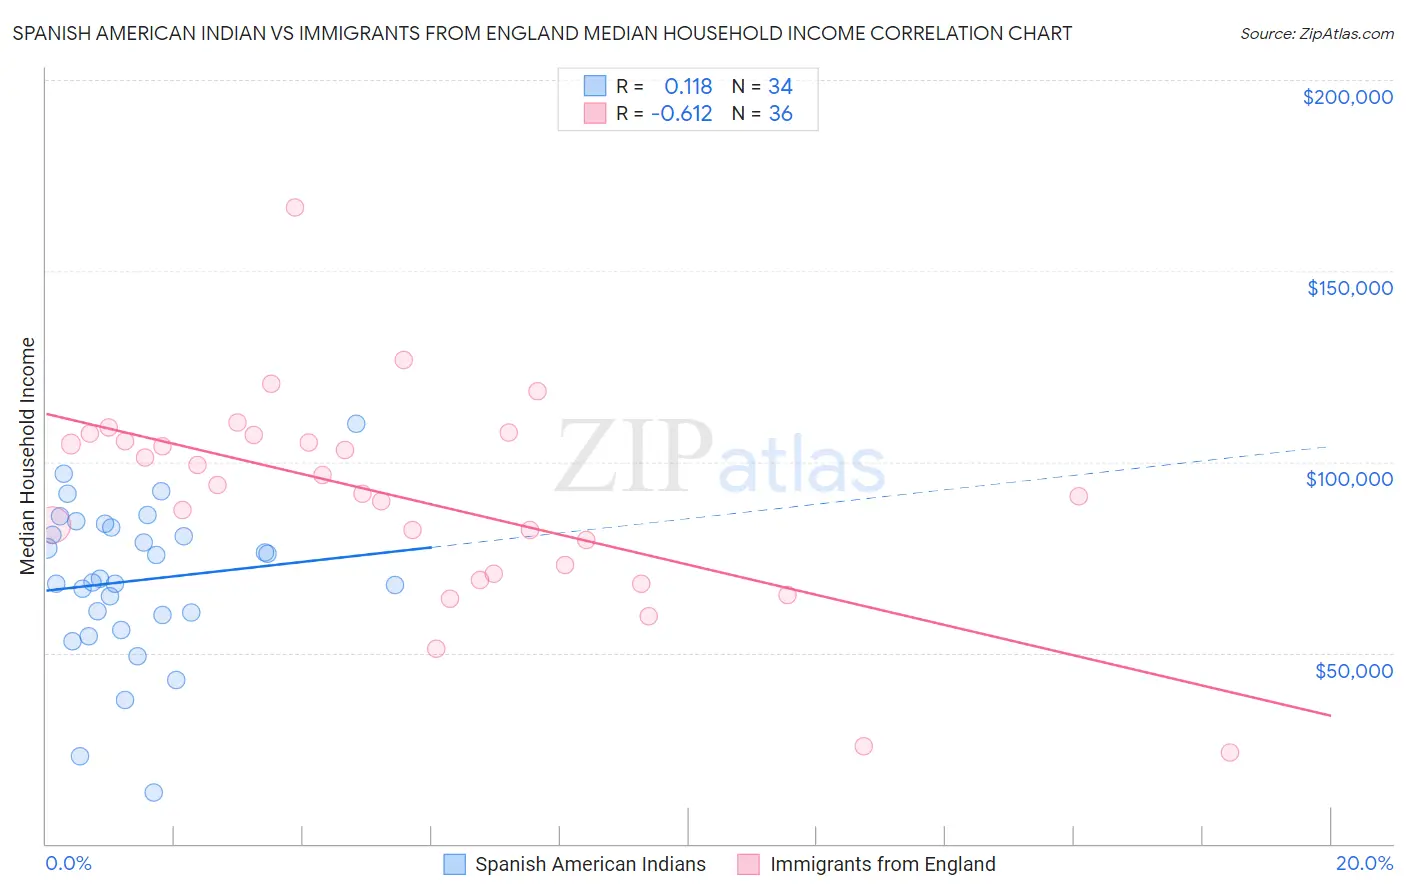 Spanish American Indian vs Immigrants from England Median Household Income